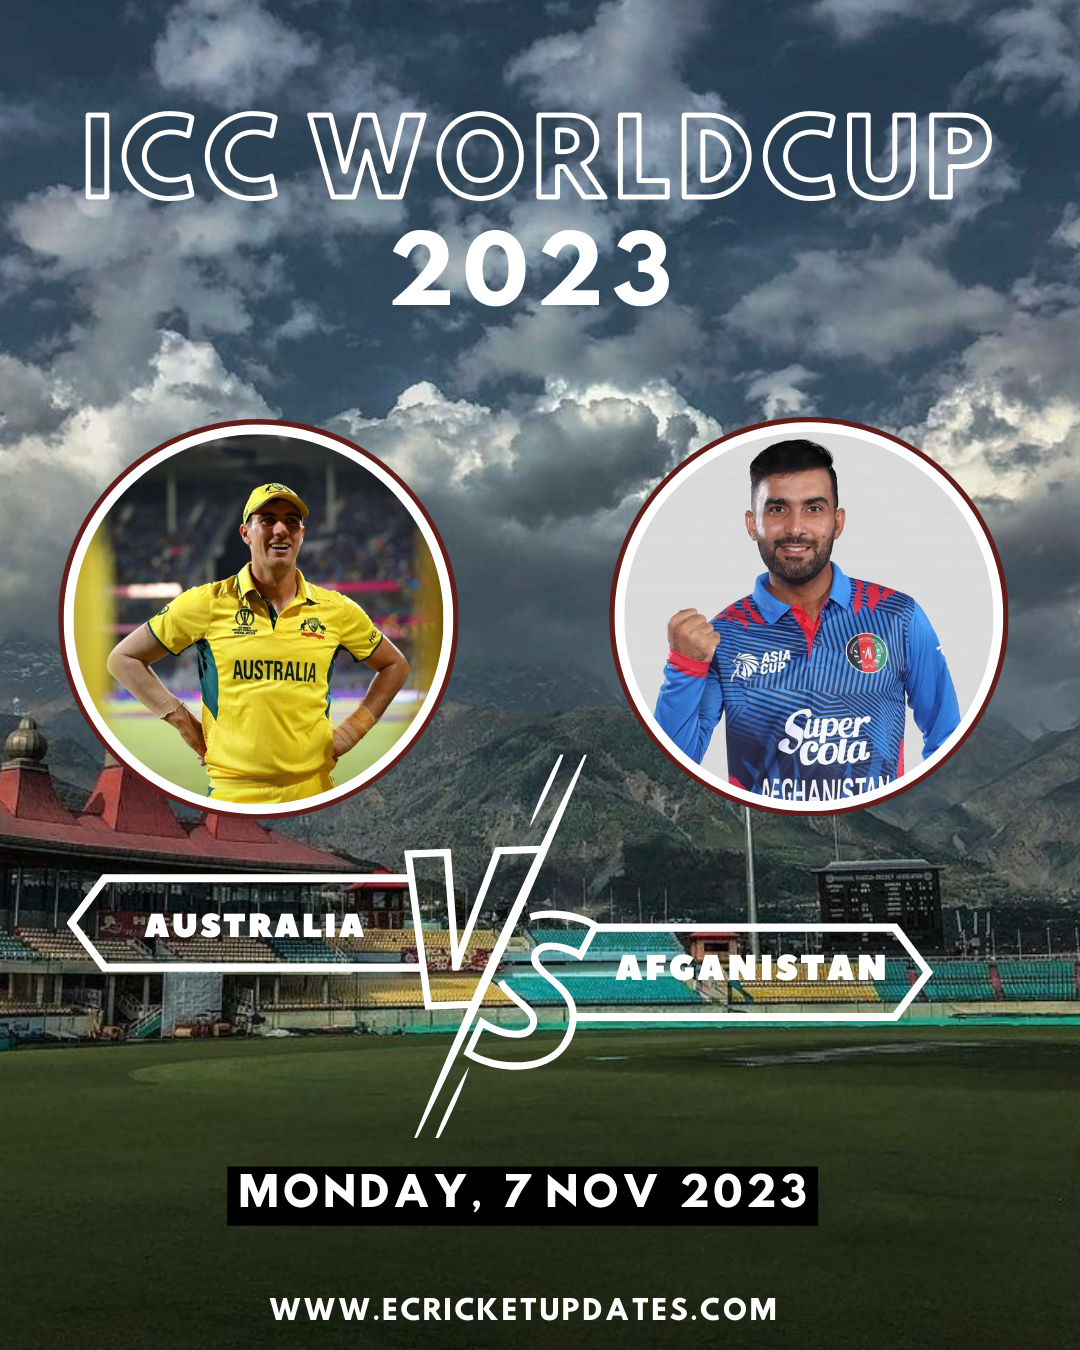 Australia vs Afghanistan: The Clash of Titans at Wankhede Stadium